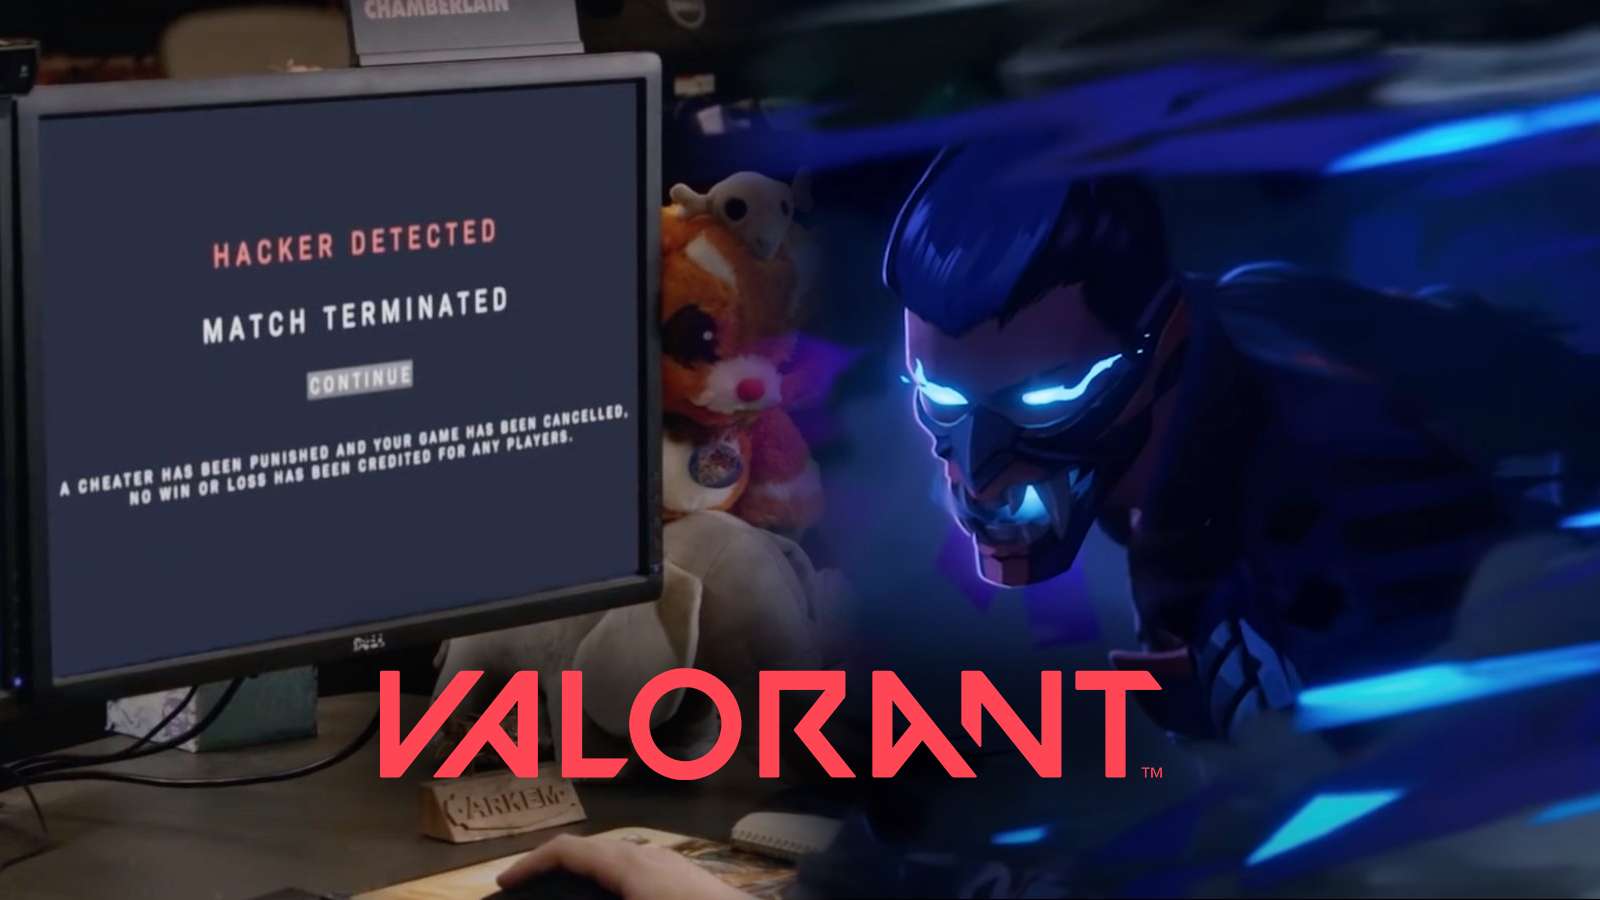 Valorant cheater detected screen next to Yoru